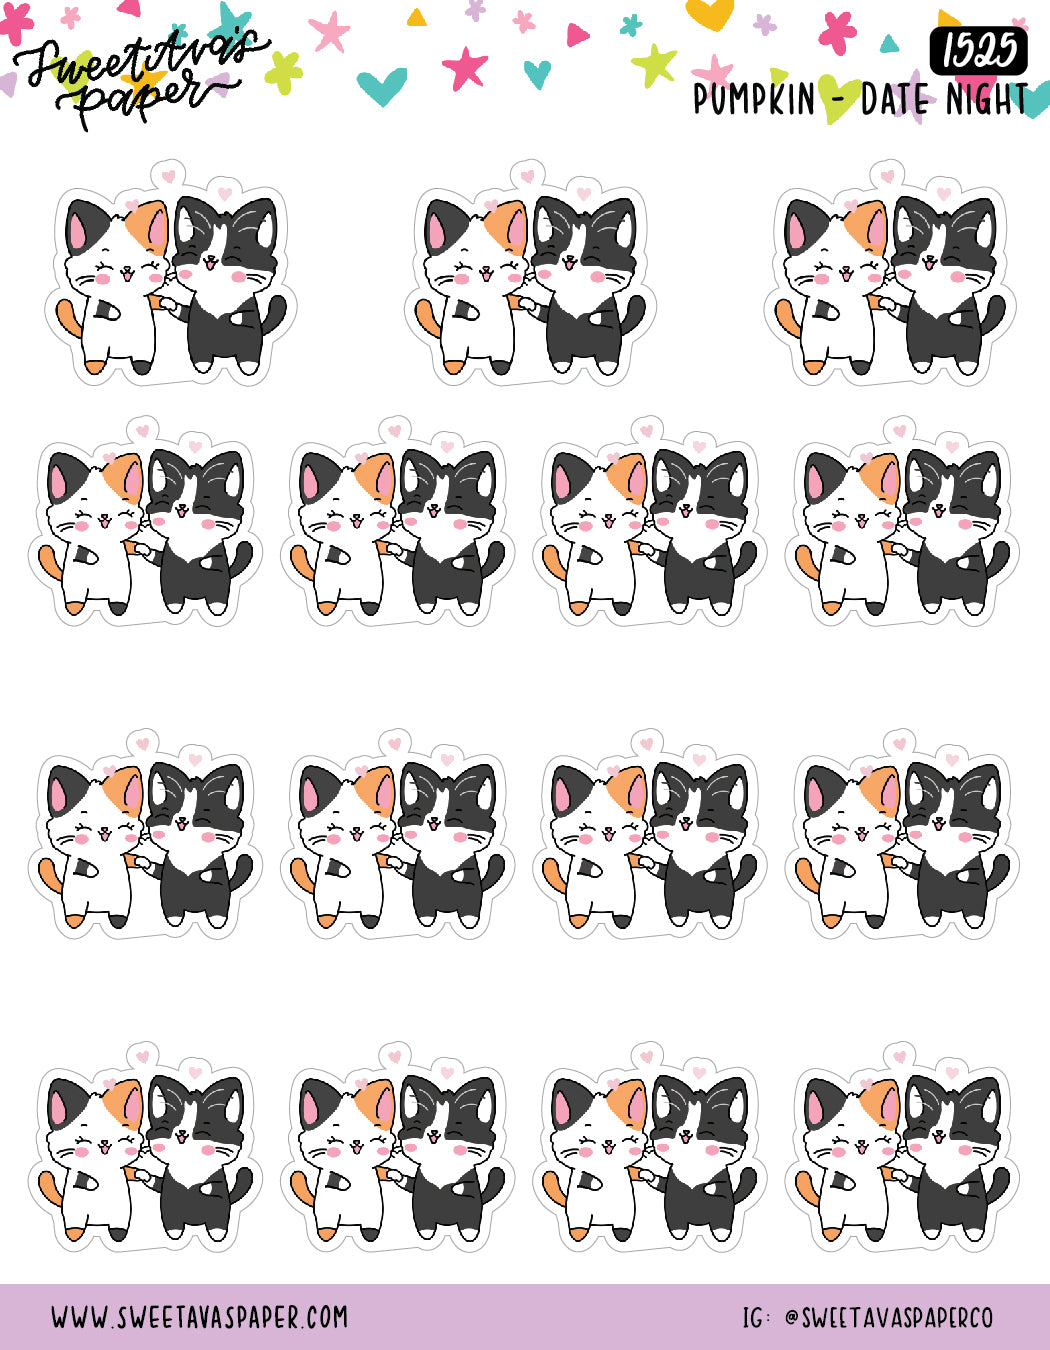 Date Night Planner Stickers - Pumpkin The Calico [1525]